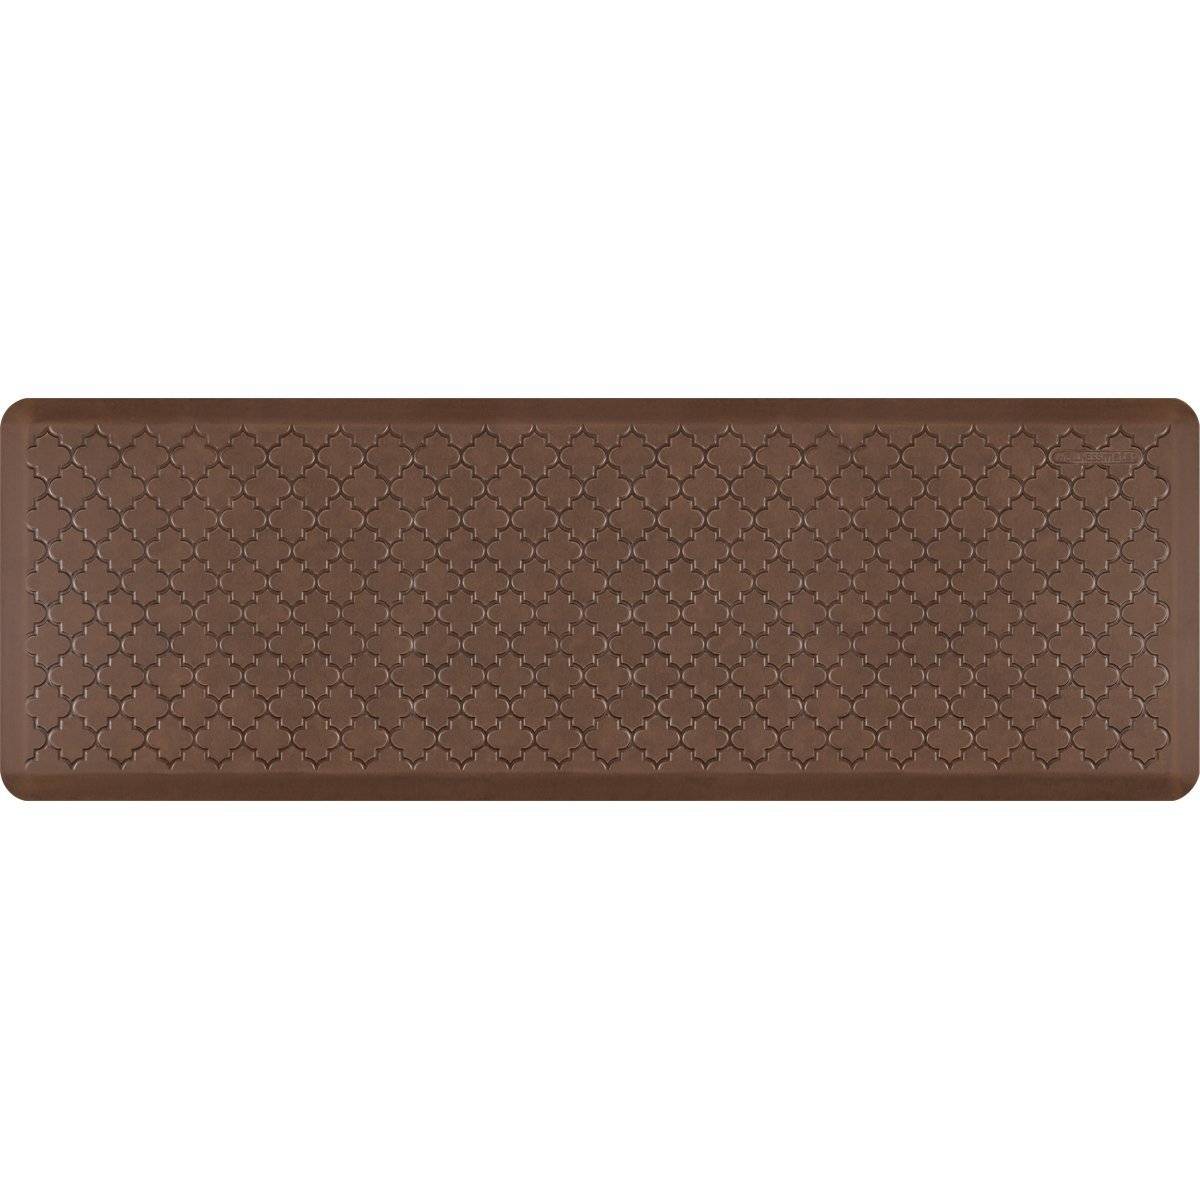 WellnessMats Trellis Antique 6'X2' MT62WMRLT, Antique Light A recyclable kitchen rug. Anti-microbial floor mat that gives comfort to your feet.